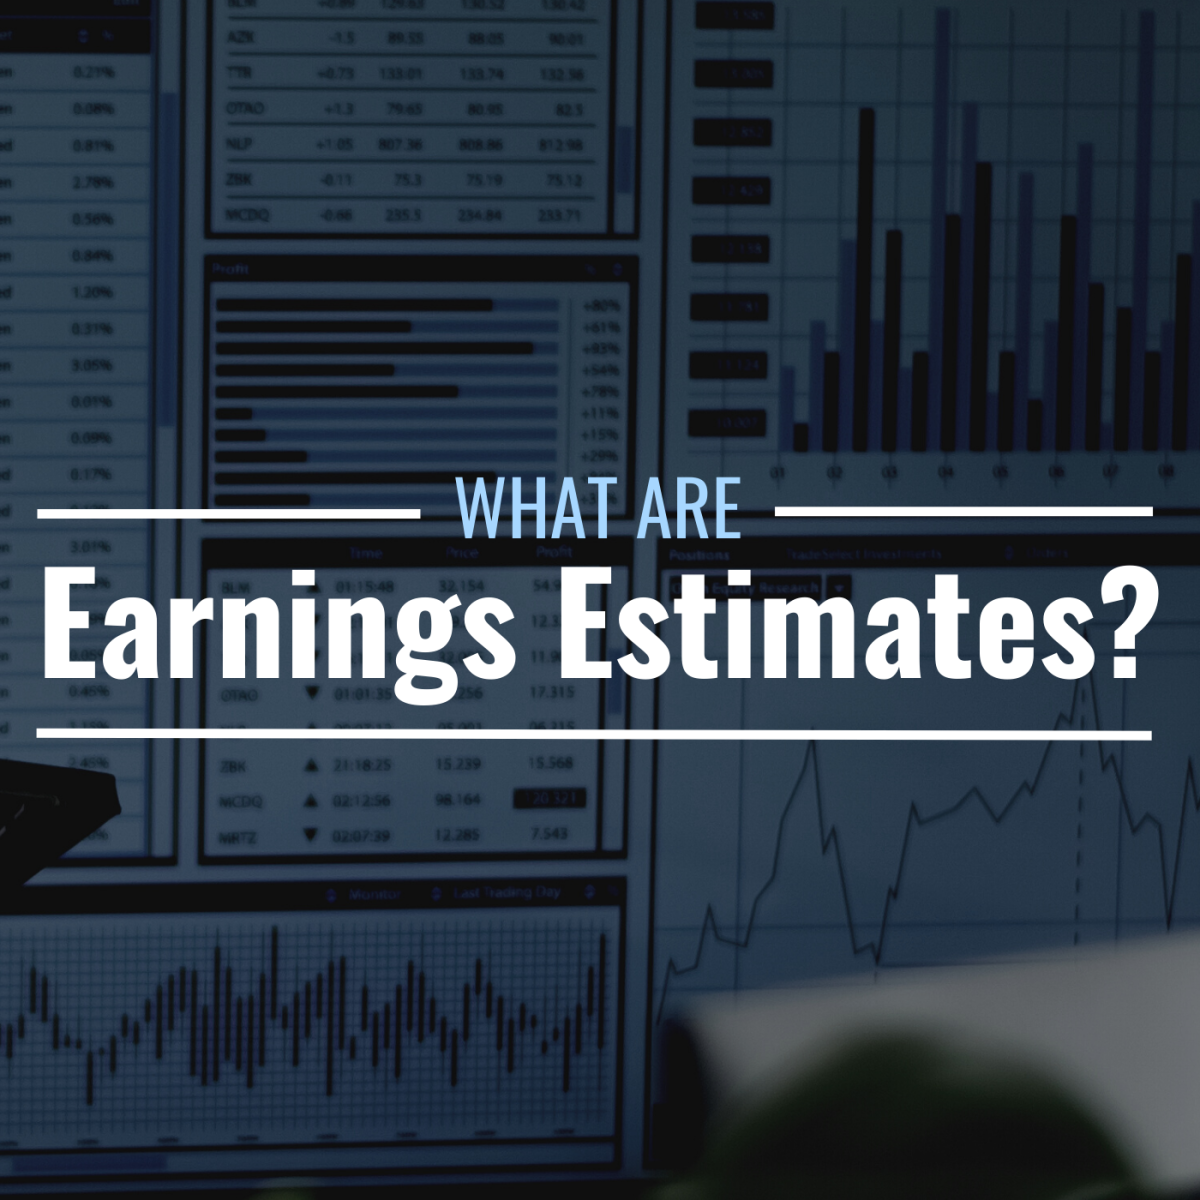 Photo of financial data on a computer screen with text overlay that reads "What Are Earnings Estimates?"